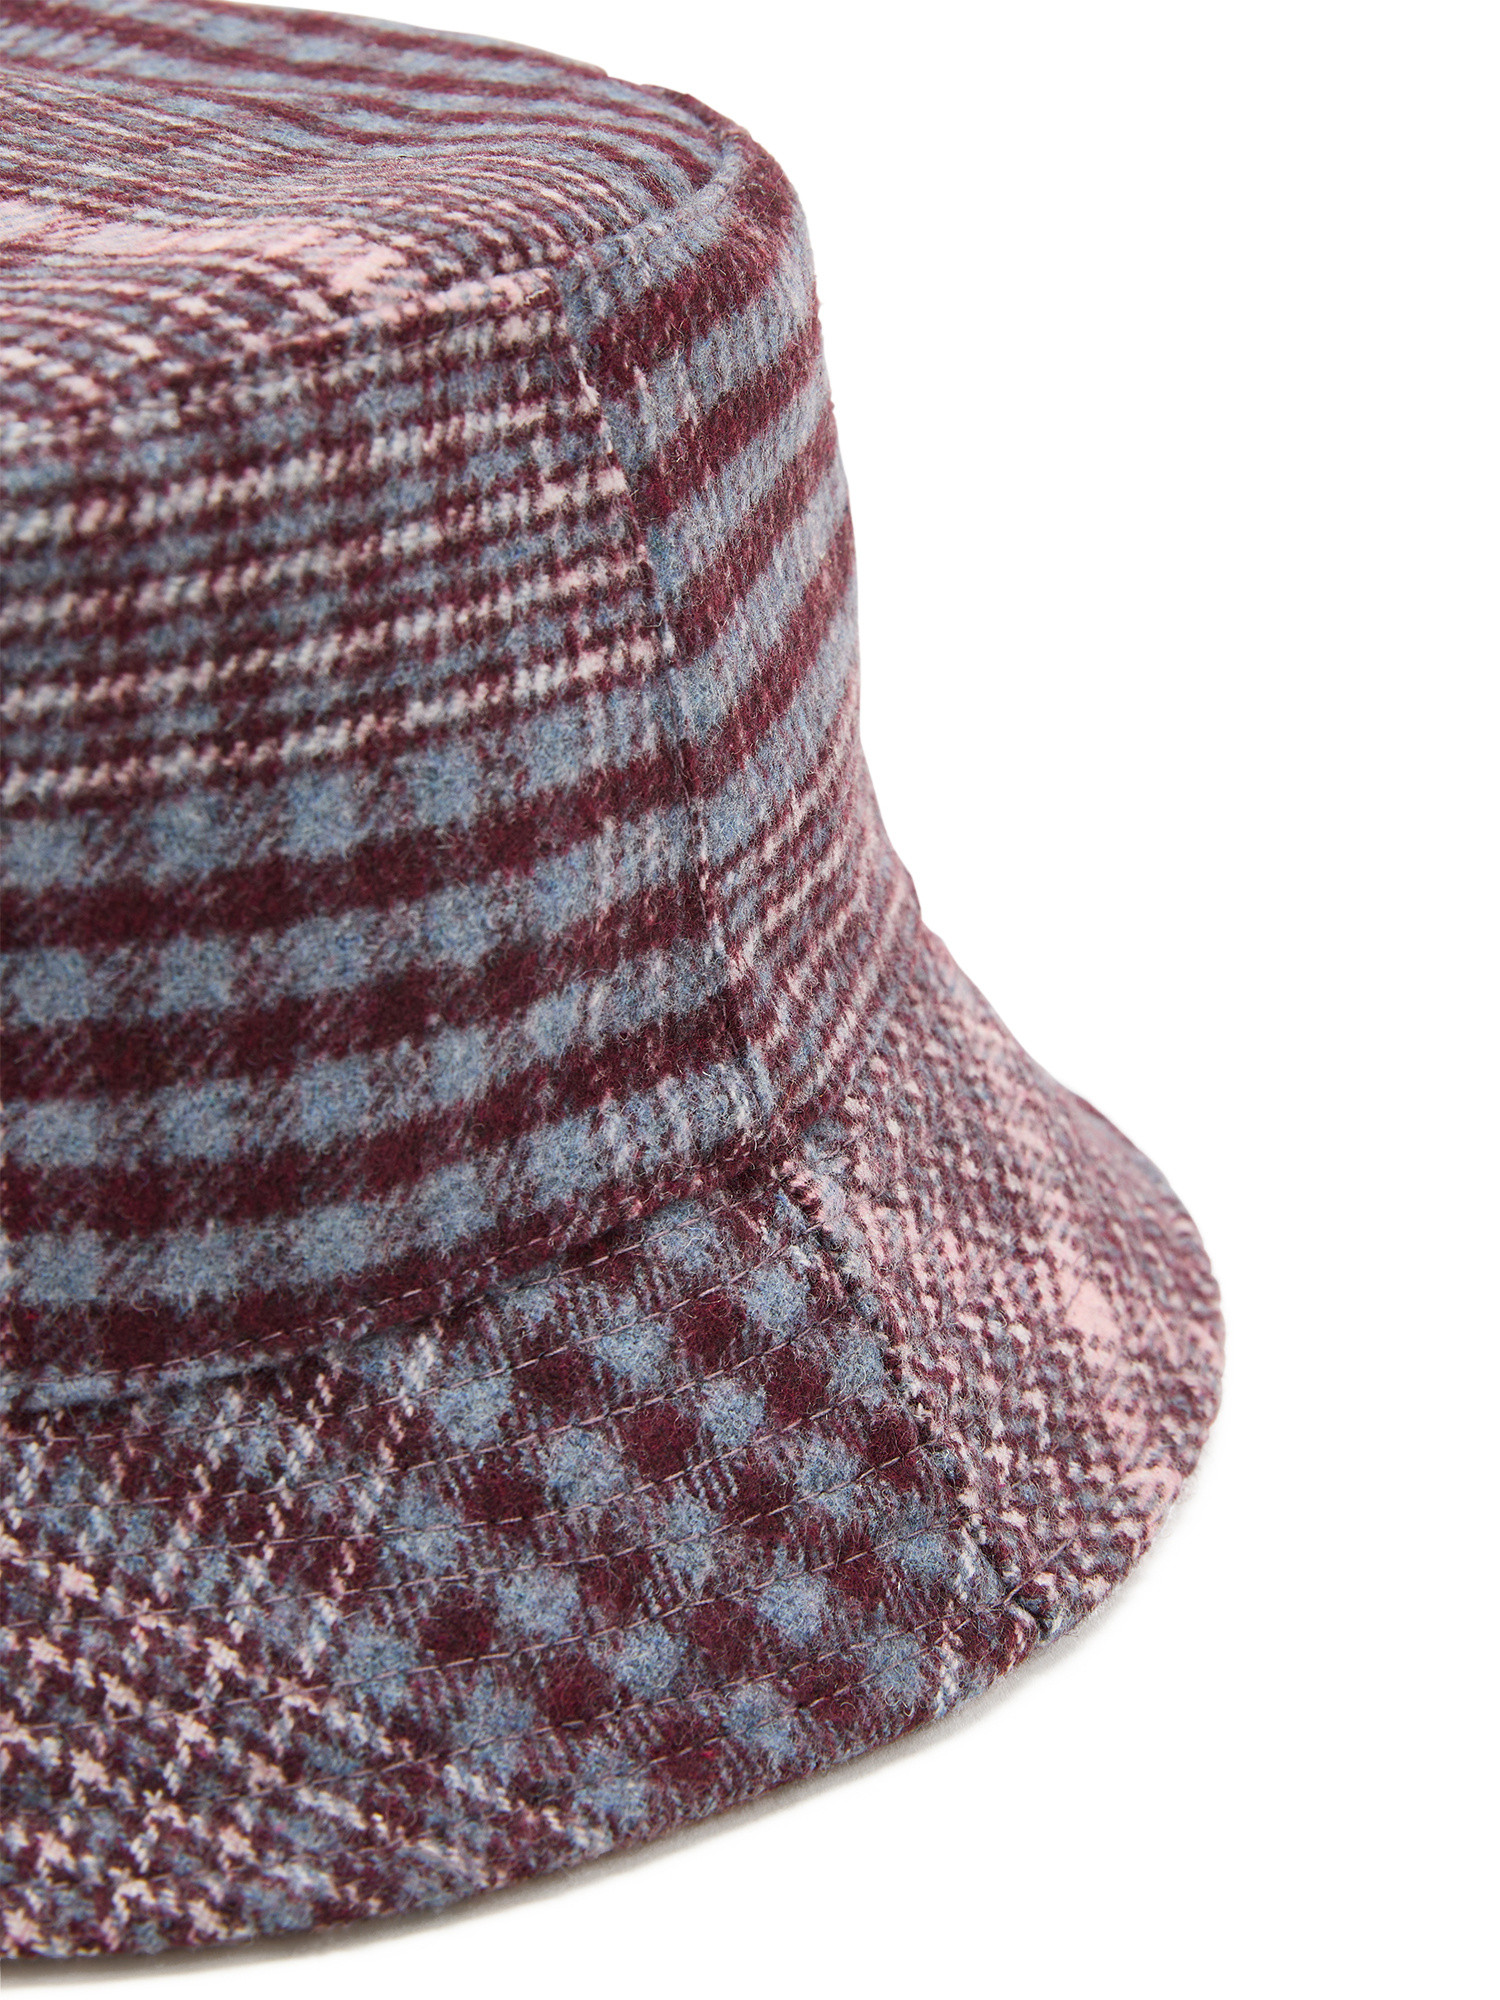 Koan - Checked cloche hat, Pink, large image number 1